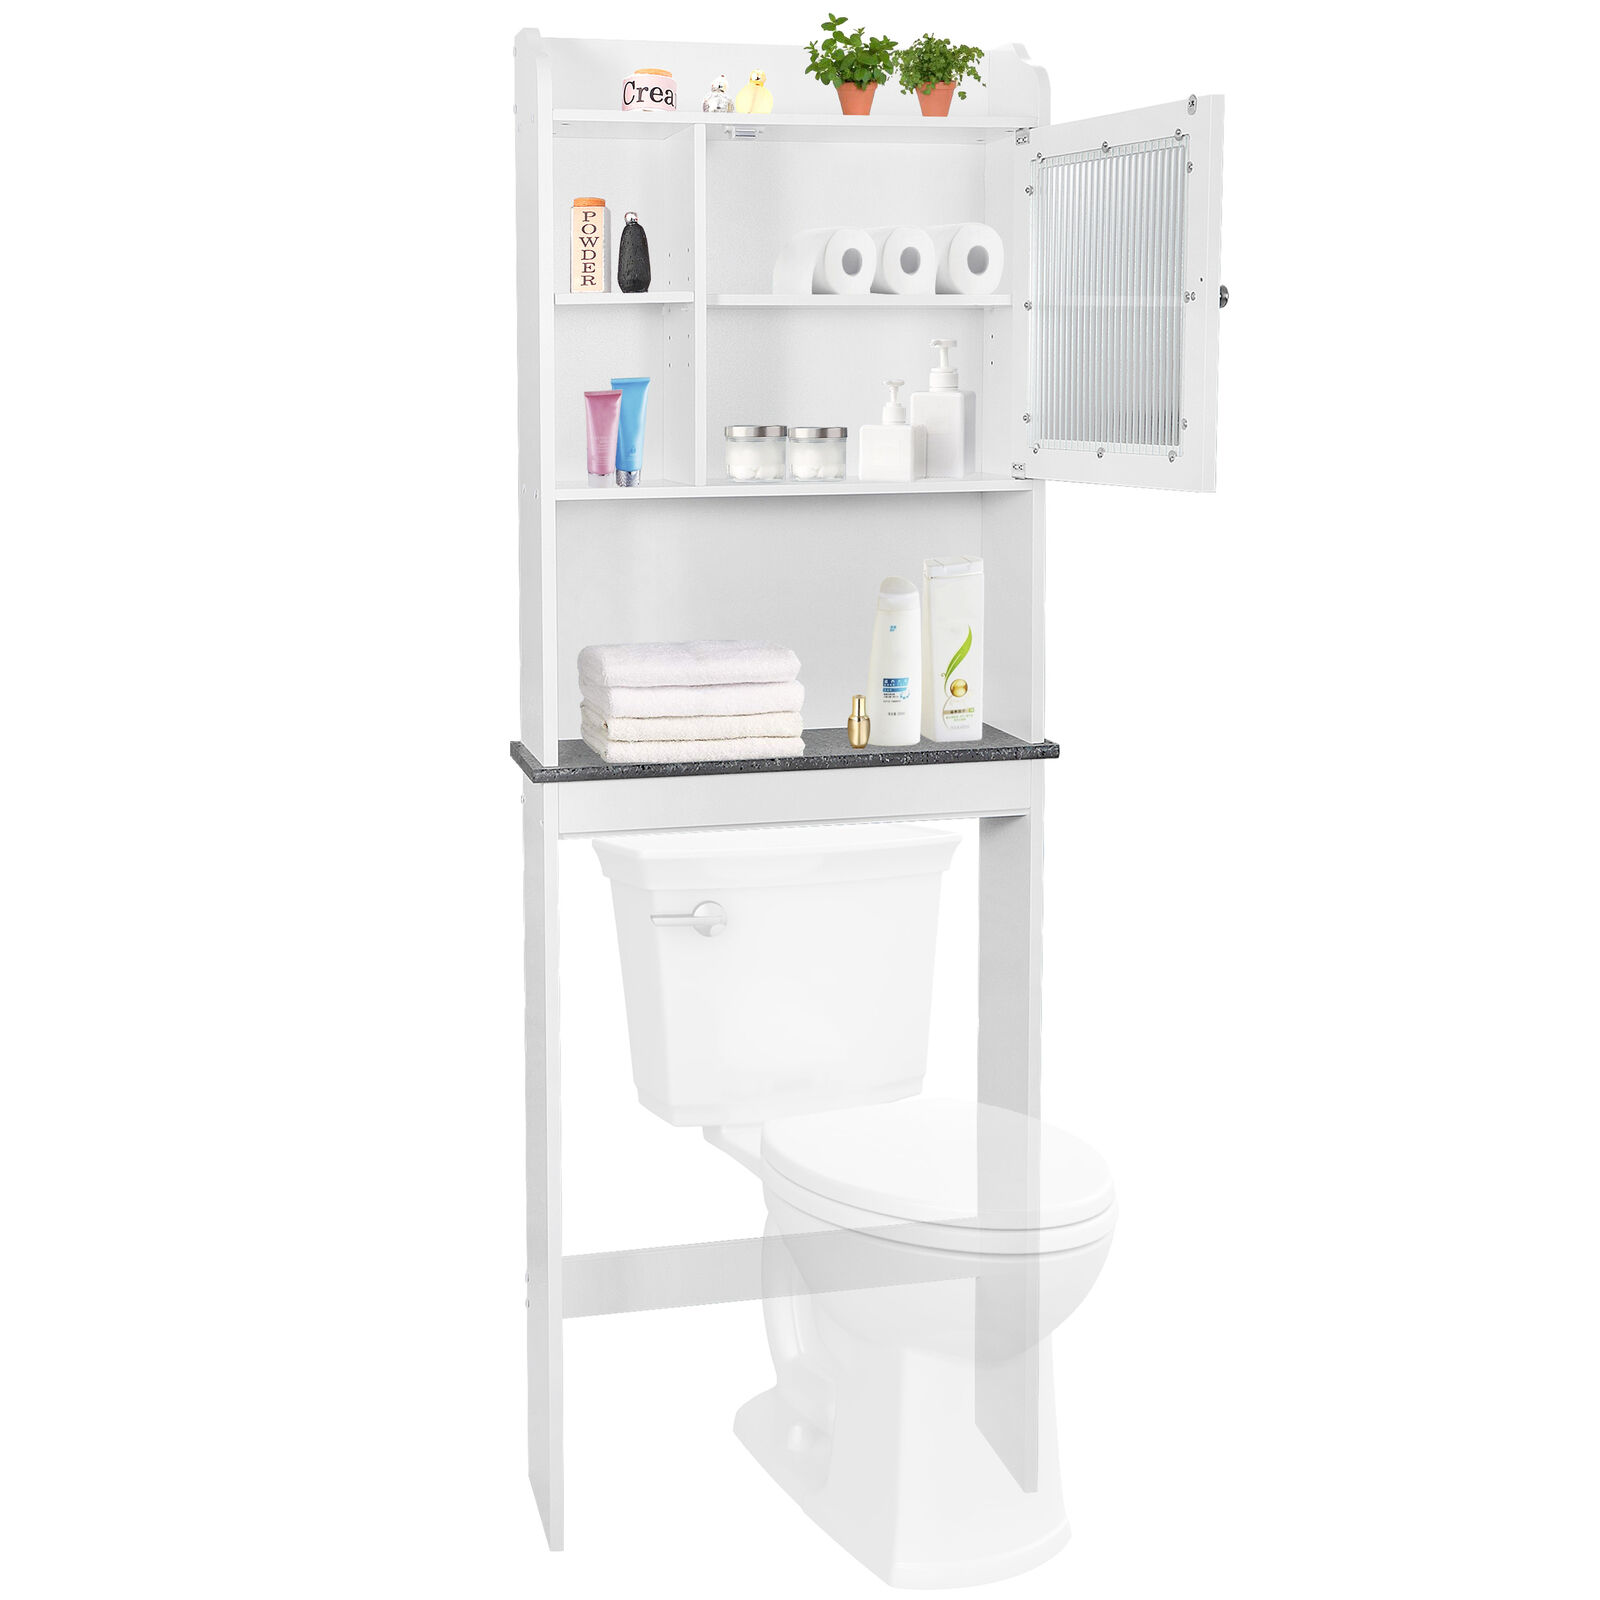 Over The Toilet Space Saver Organization Wood Storage Cabinet Home Bathroom